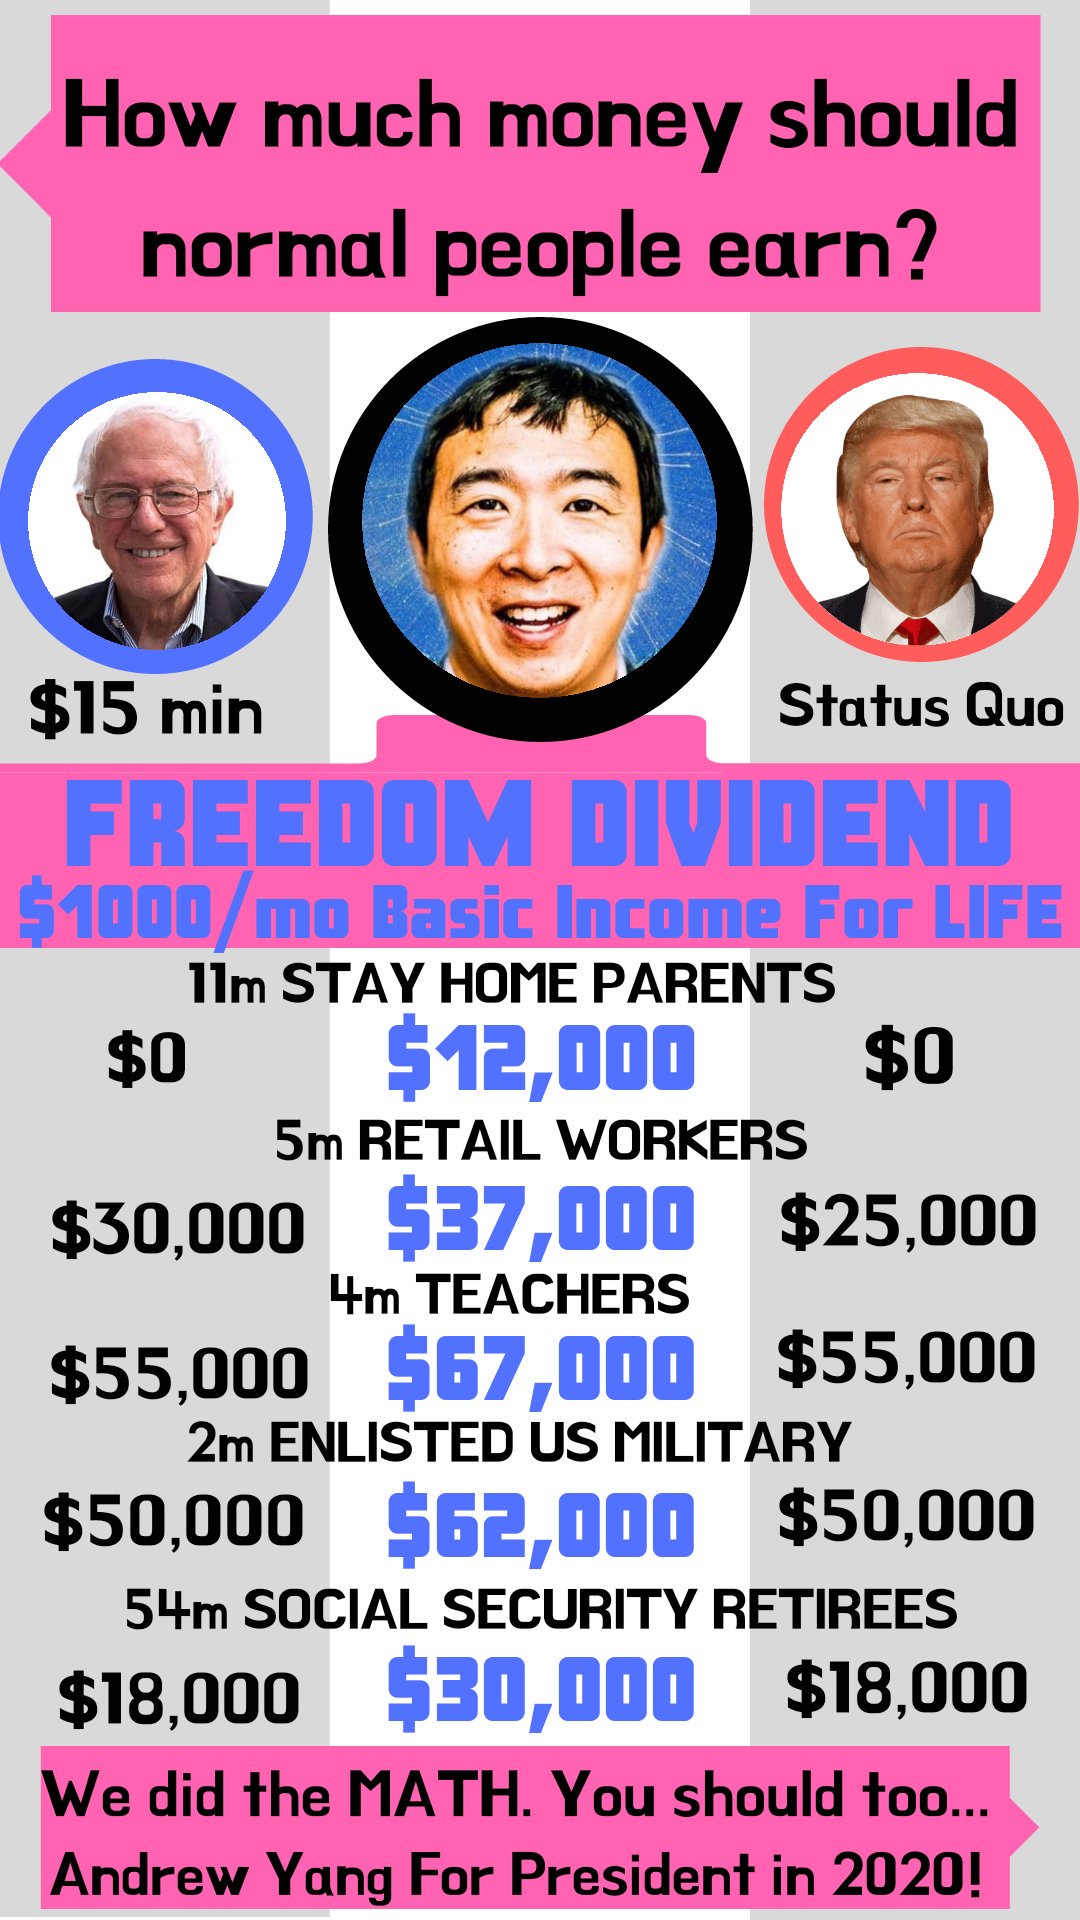 humanity-first yang-memes humanity-first text: How much money should normal people earn? $15 min Status Quo 11m STAY HOME PARENTS $12,000 $0 $0 5m RETAIL WORKERS $37,000 $25,000 $30,000 TEACHERS $67,000 $55,000 $55,000 2m ENLISTED US MILITARY $62,000 $50,000 $50,000 54m SOCIAL SECURITY RETIREES $30,000 $18,000 $18,000 e did the MATH. You should too... AndrewYanq For President in2020! 